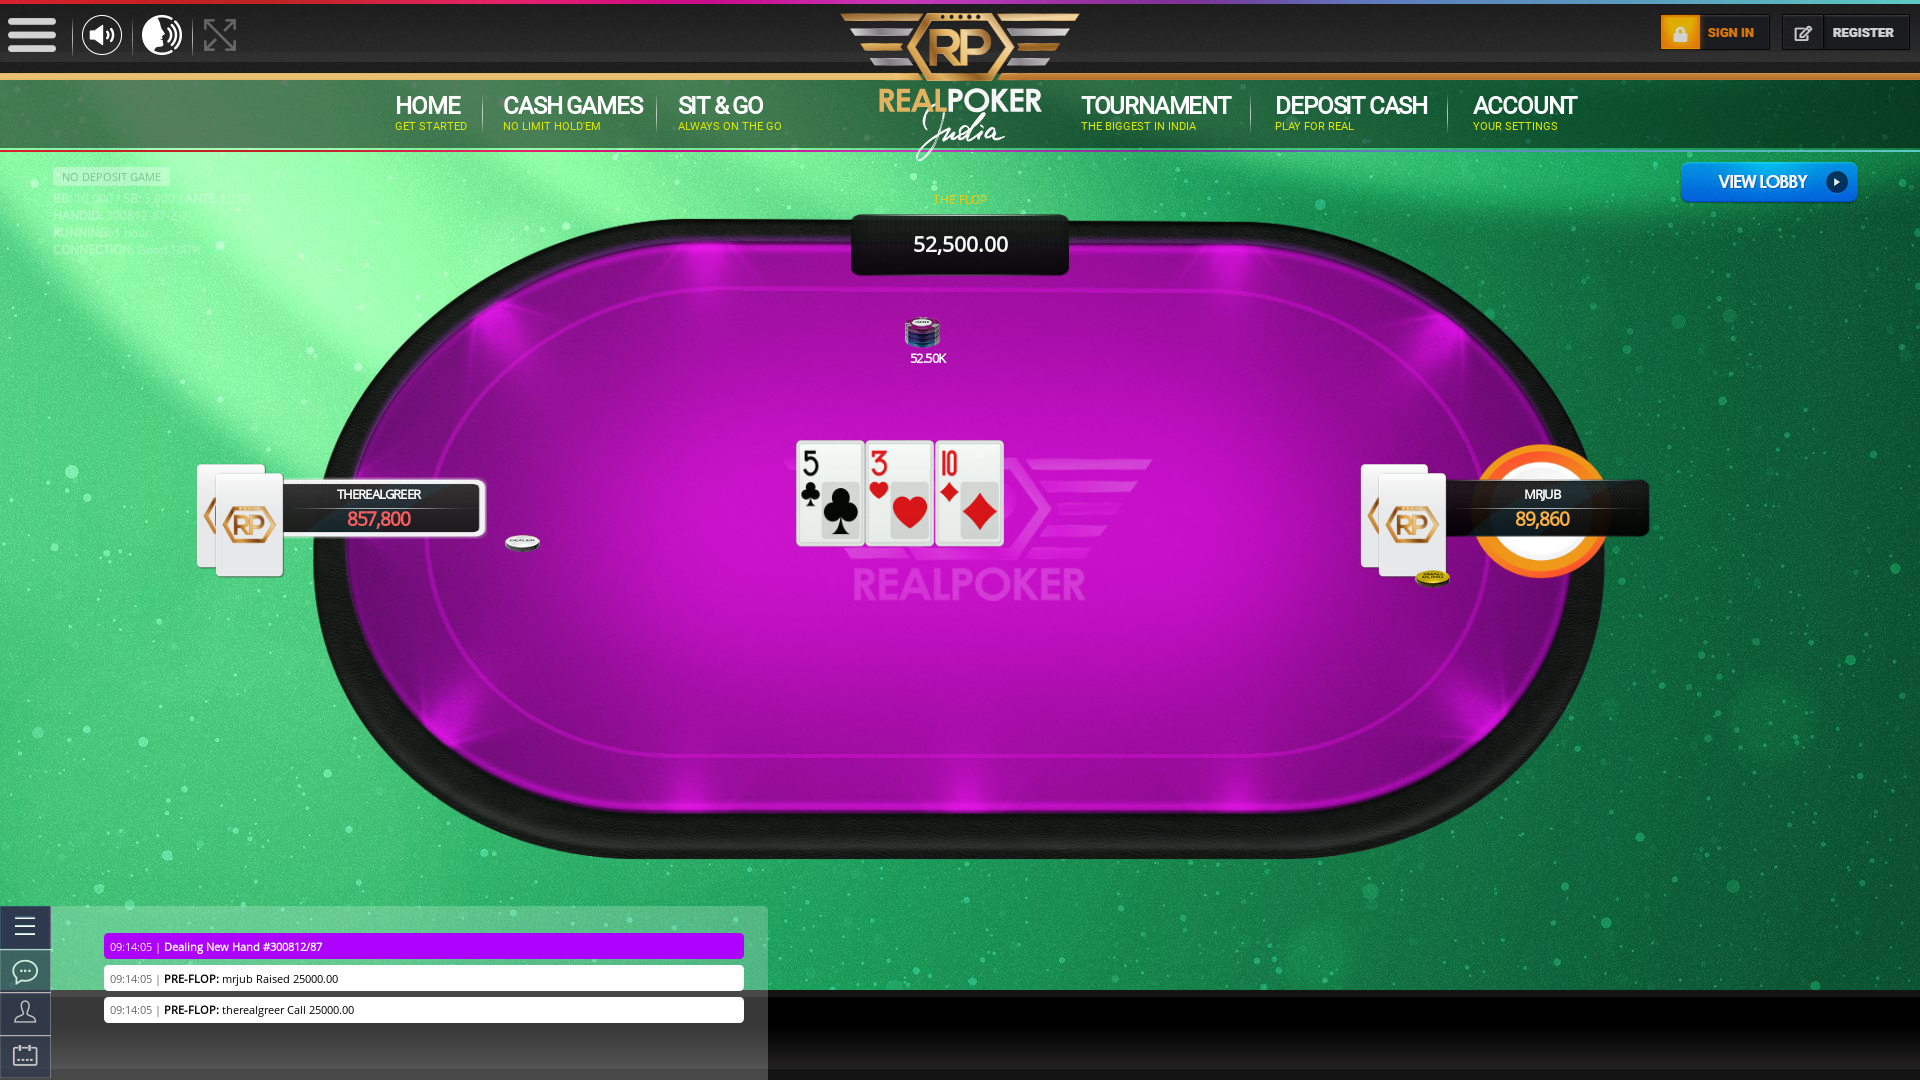 Indian online poker on a 10 player table in the 87th minute match up